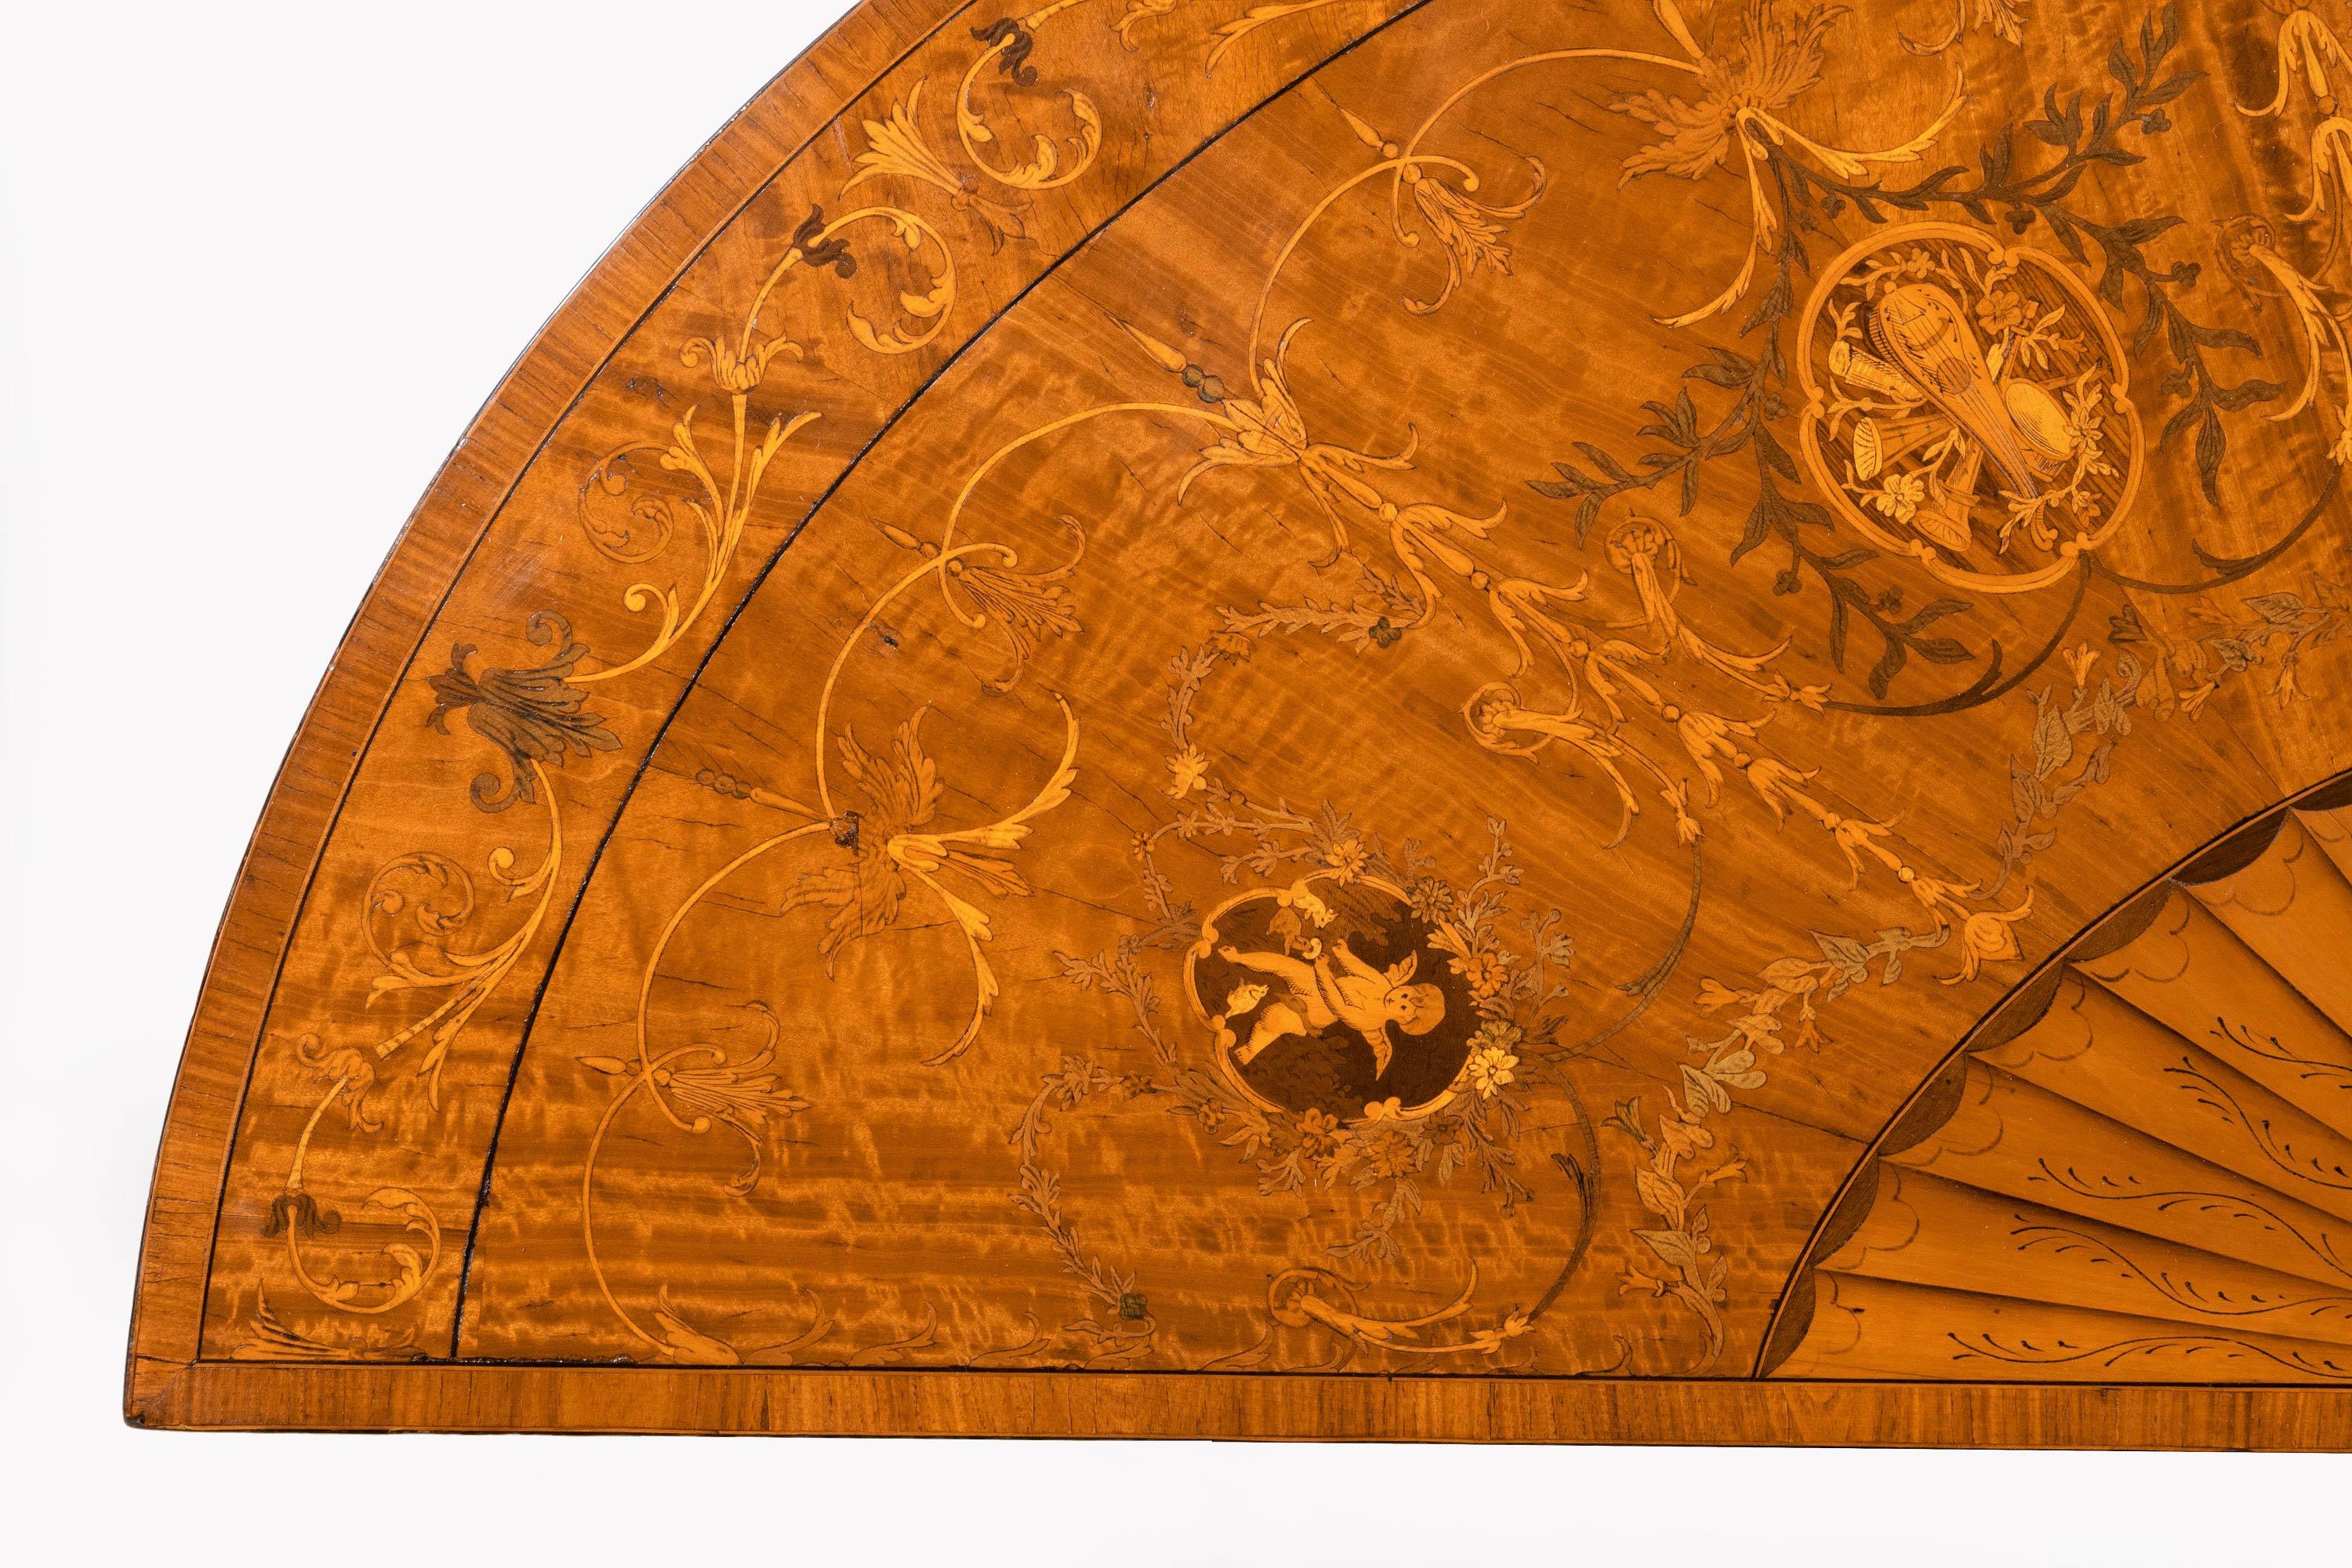 A beautifully inlaid George III period mahogany demilune pier table of complex form. Marquetry and parquetry inlays to all surfaces including Putti and a large sunburst centre section. Excellent overall condition, color and patina.
 